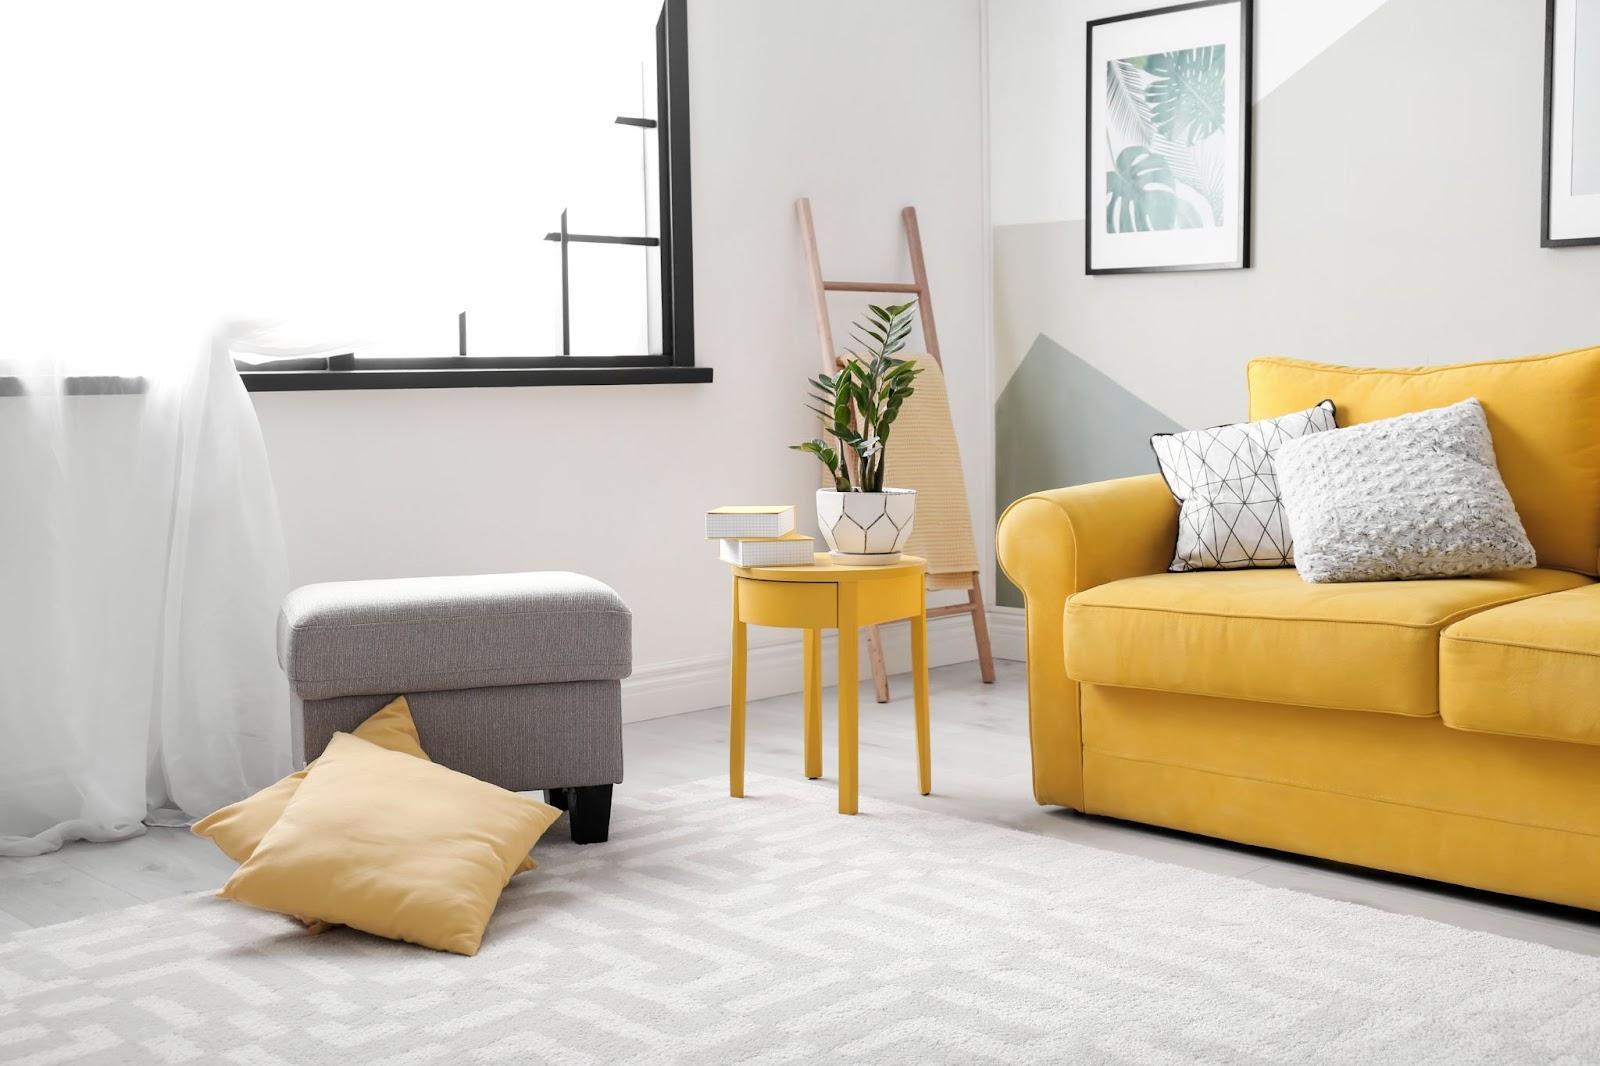 10 Ideas For A Mustard Yellow Sofa